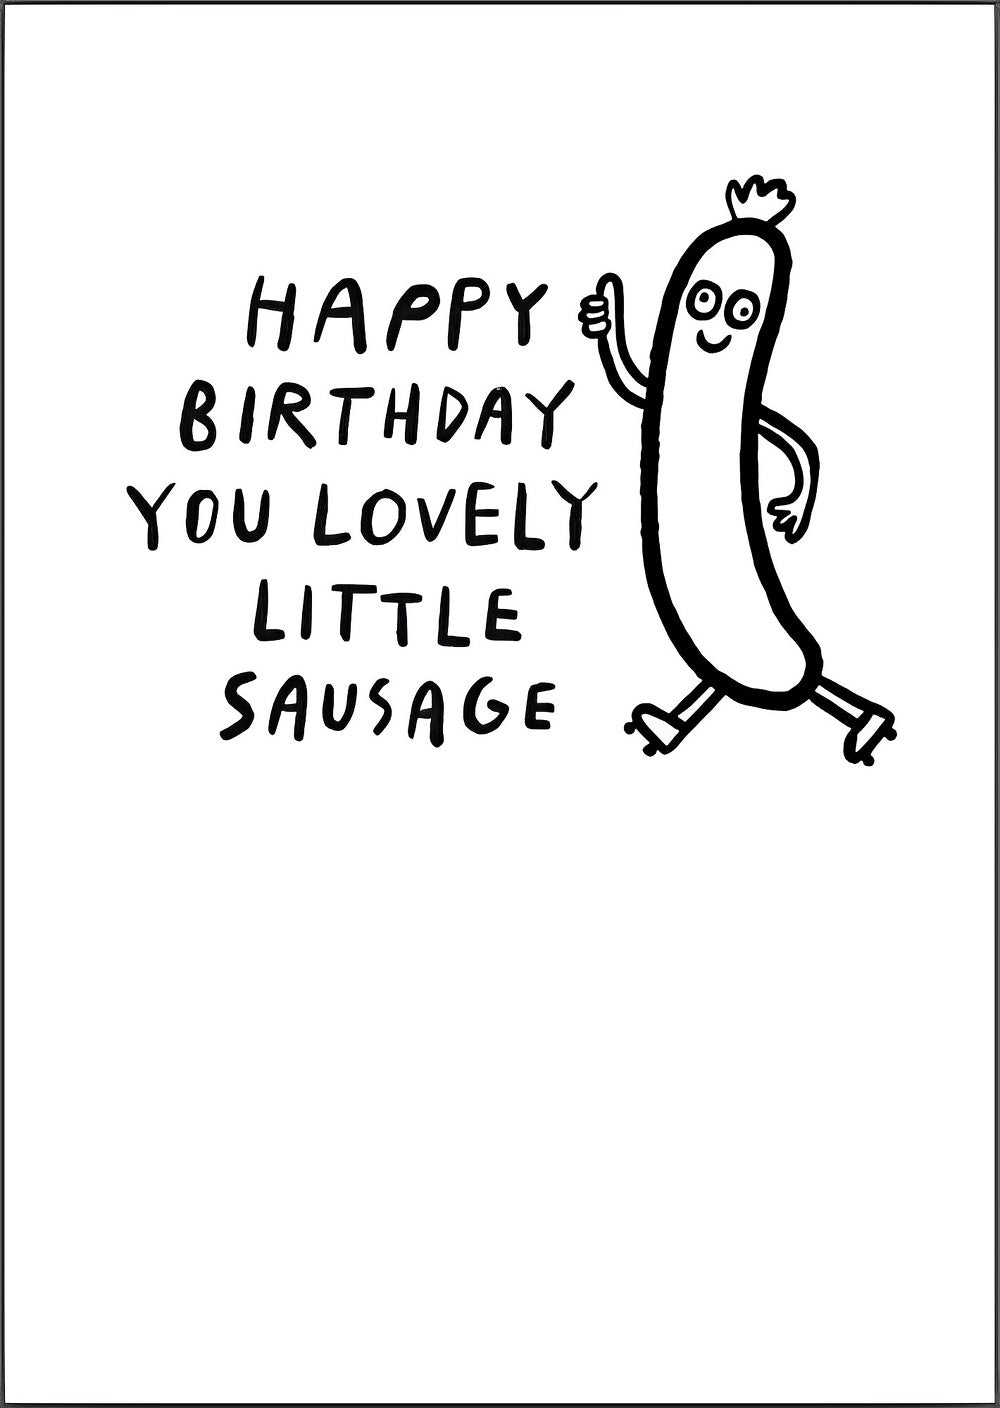 Lovely Little Sausage Funny Birthday Card by penny black